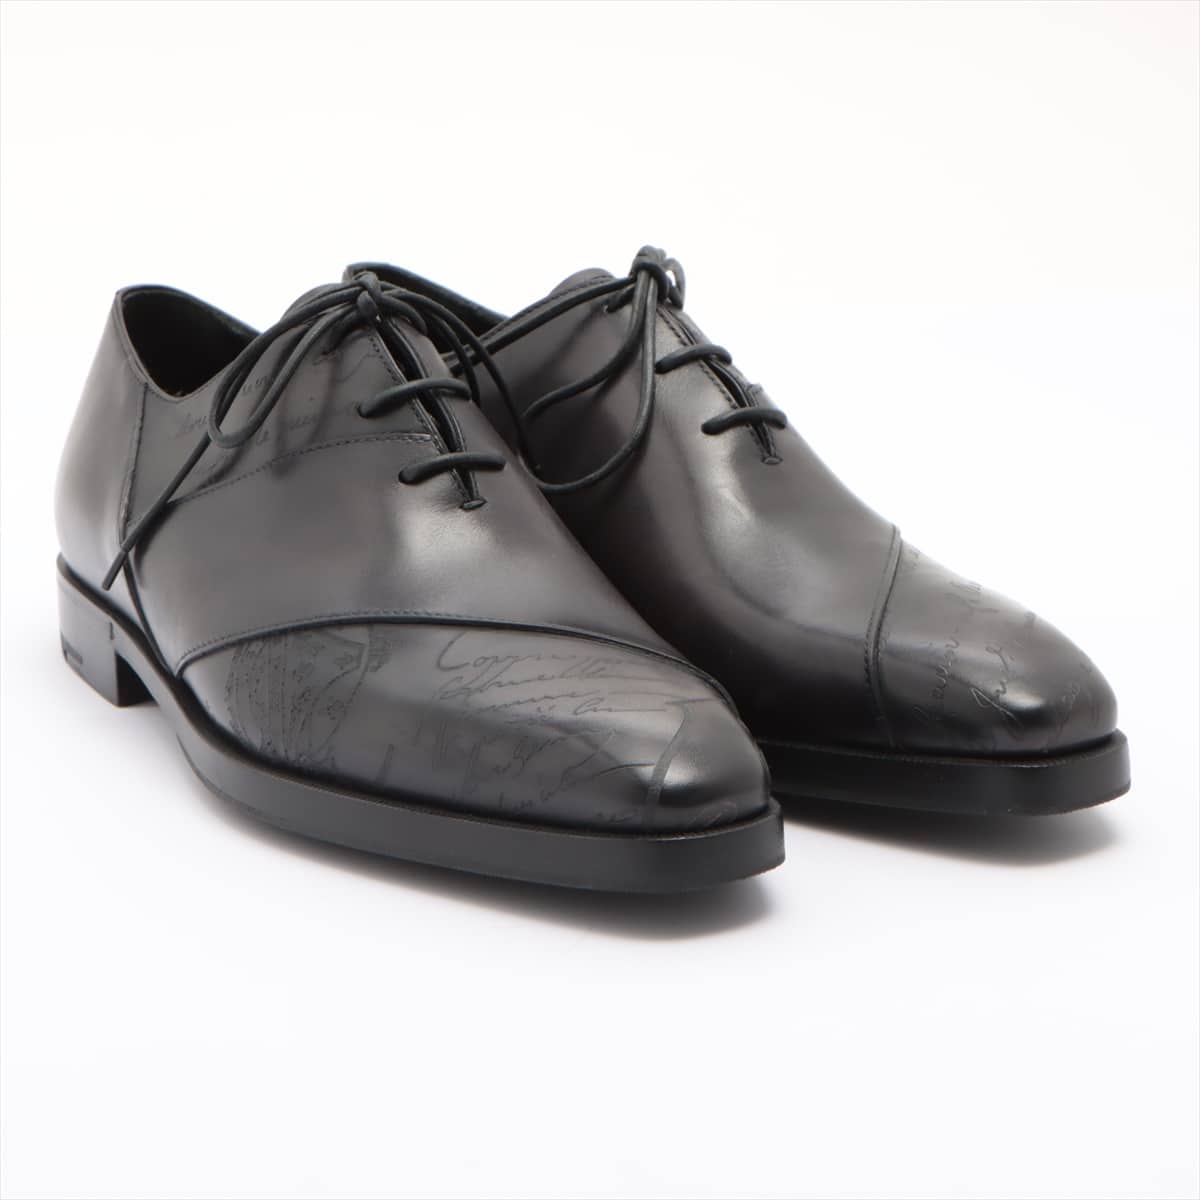 Berluti Leather Leather shoes 6 1/2 Men's Black Comes with genuine shoe keeper 5210 Patchwork Demjour